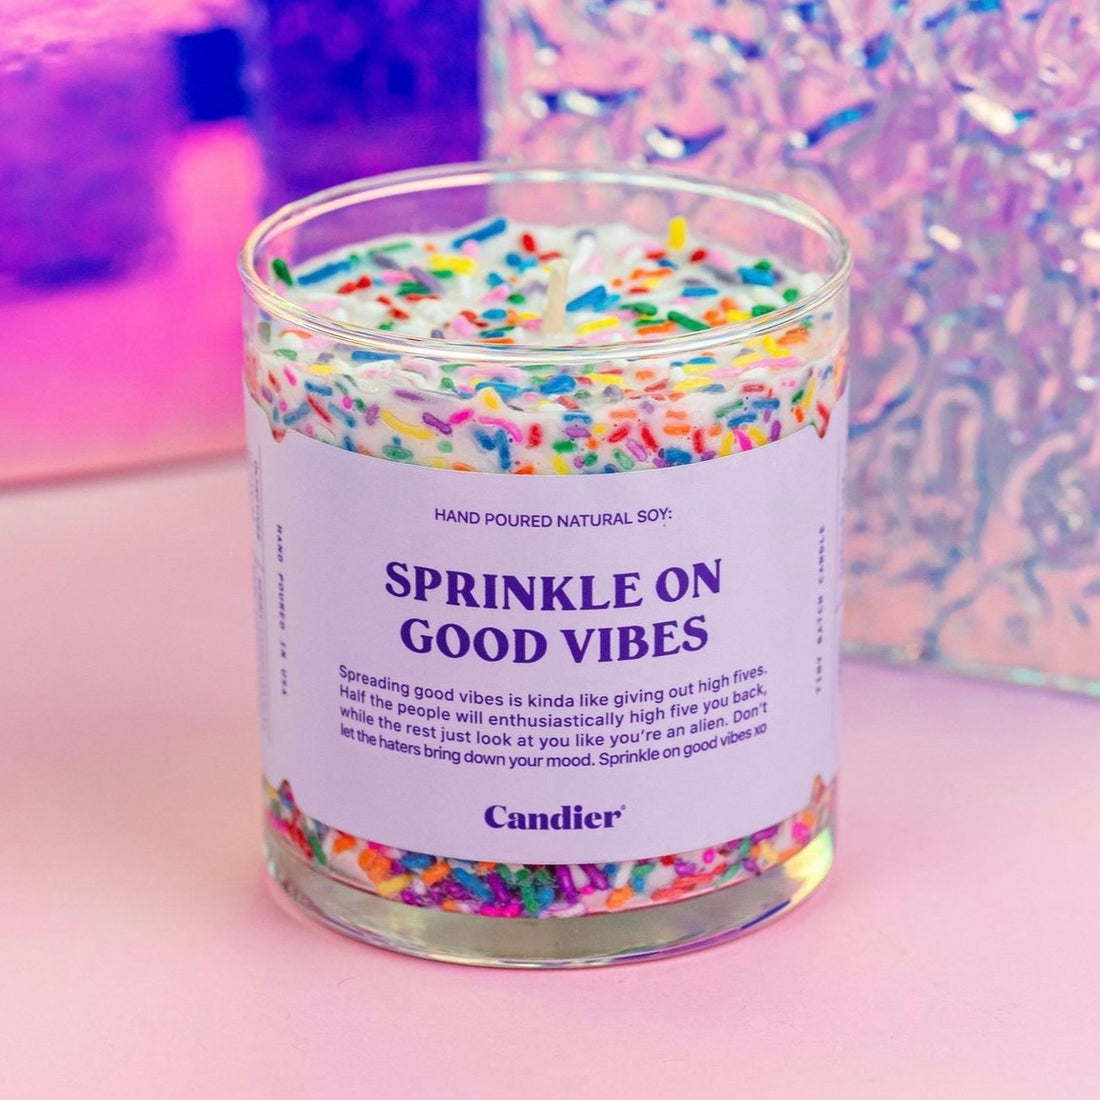 Sprinkle on Good Vibes Candle